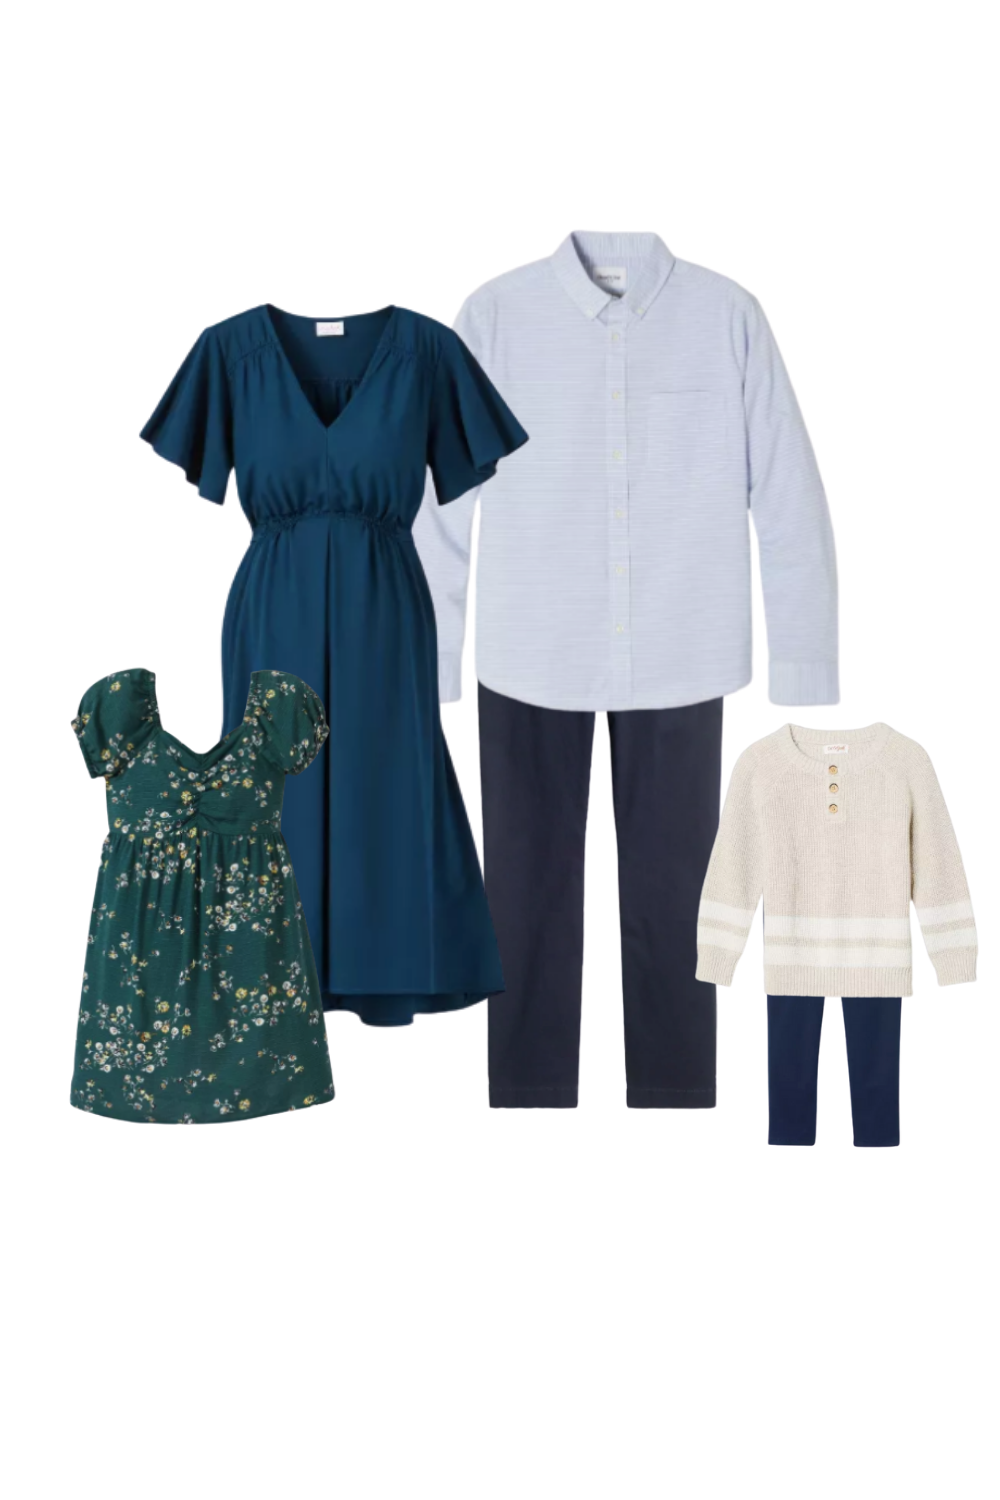 Target Outfits for Fall Family Photos